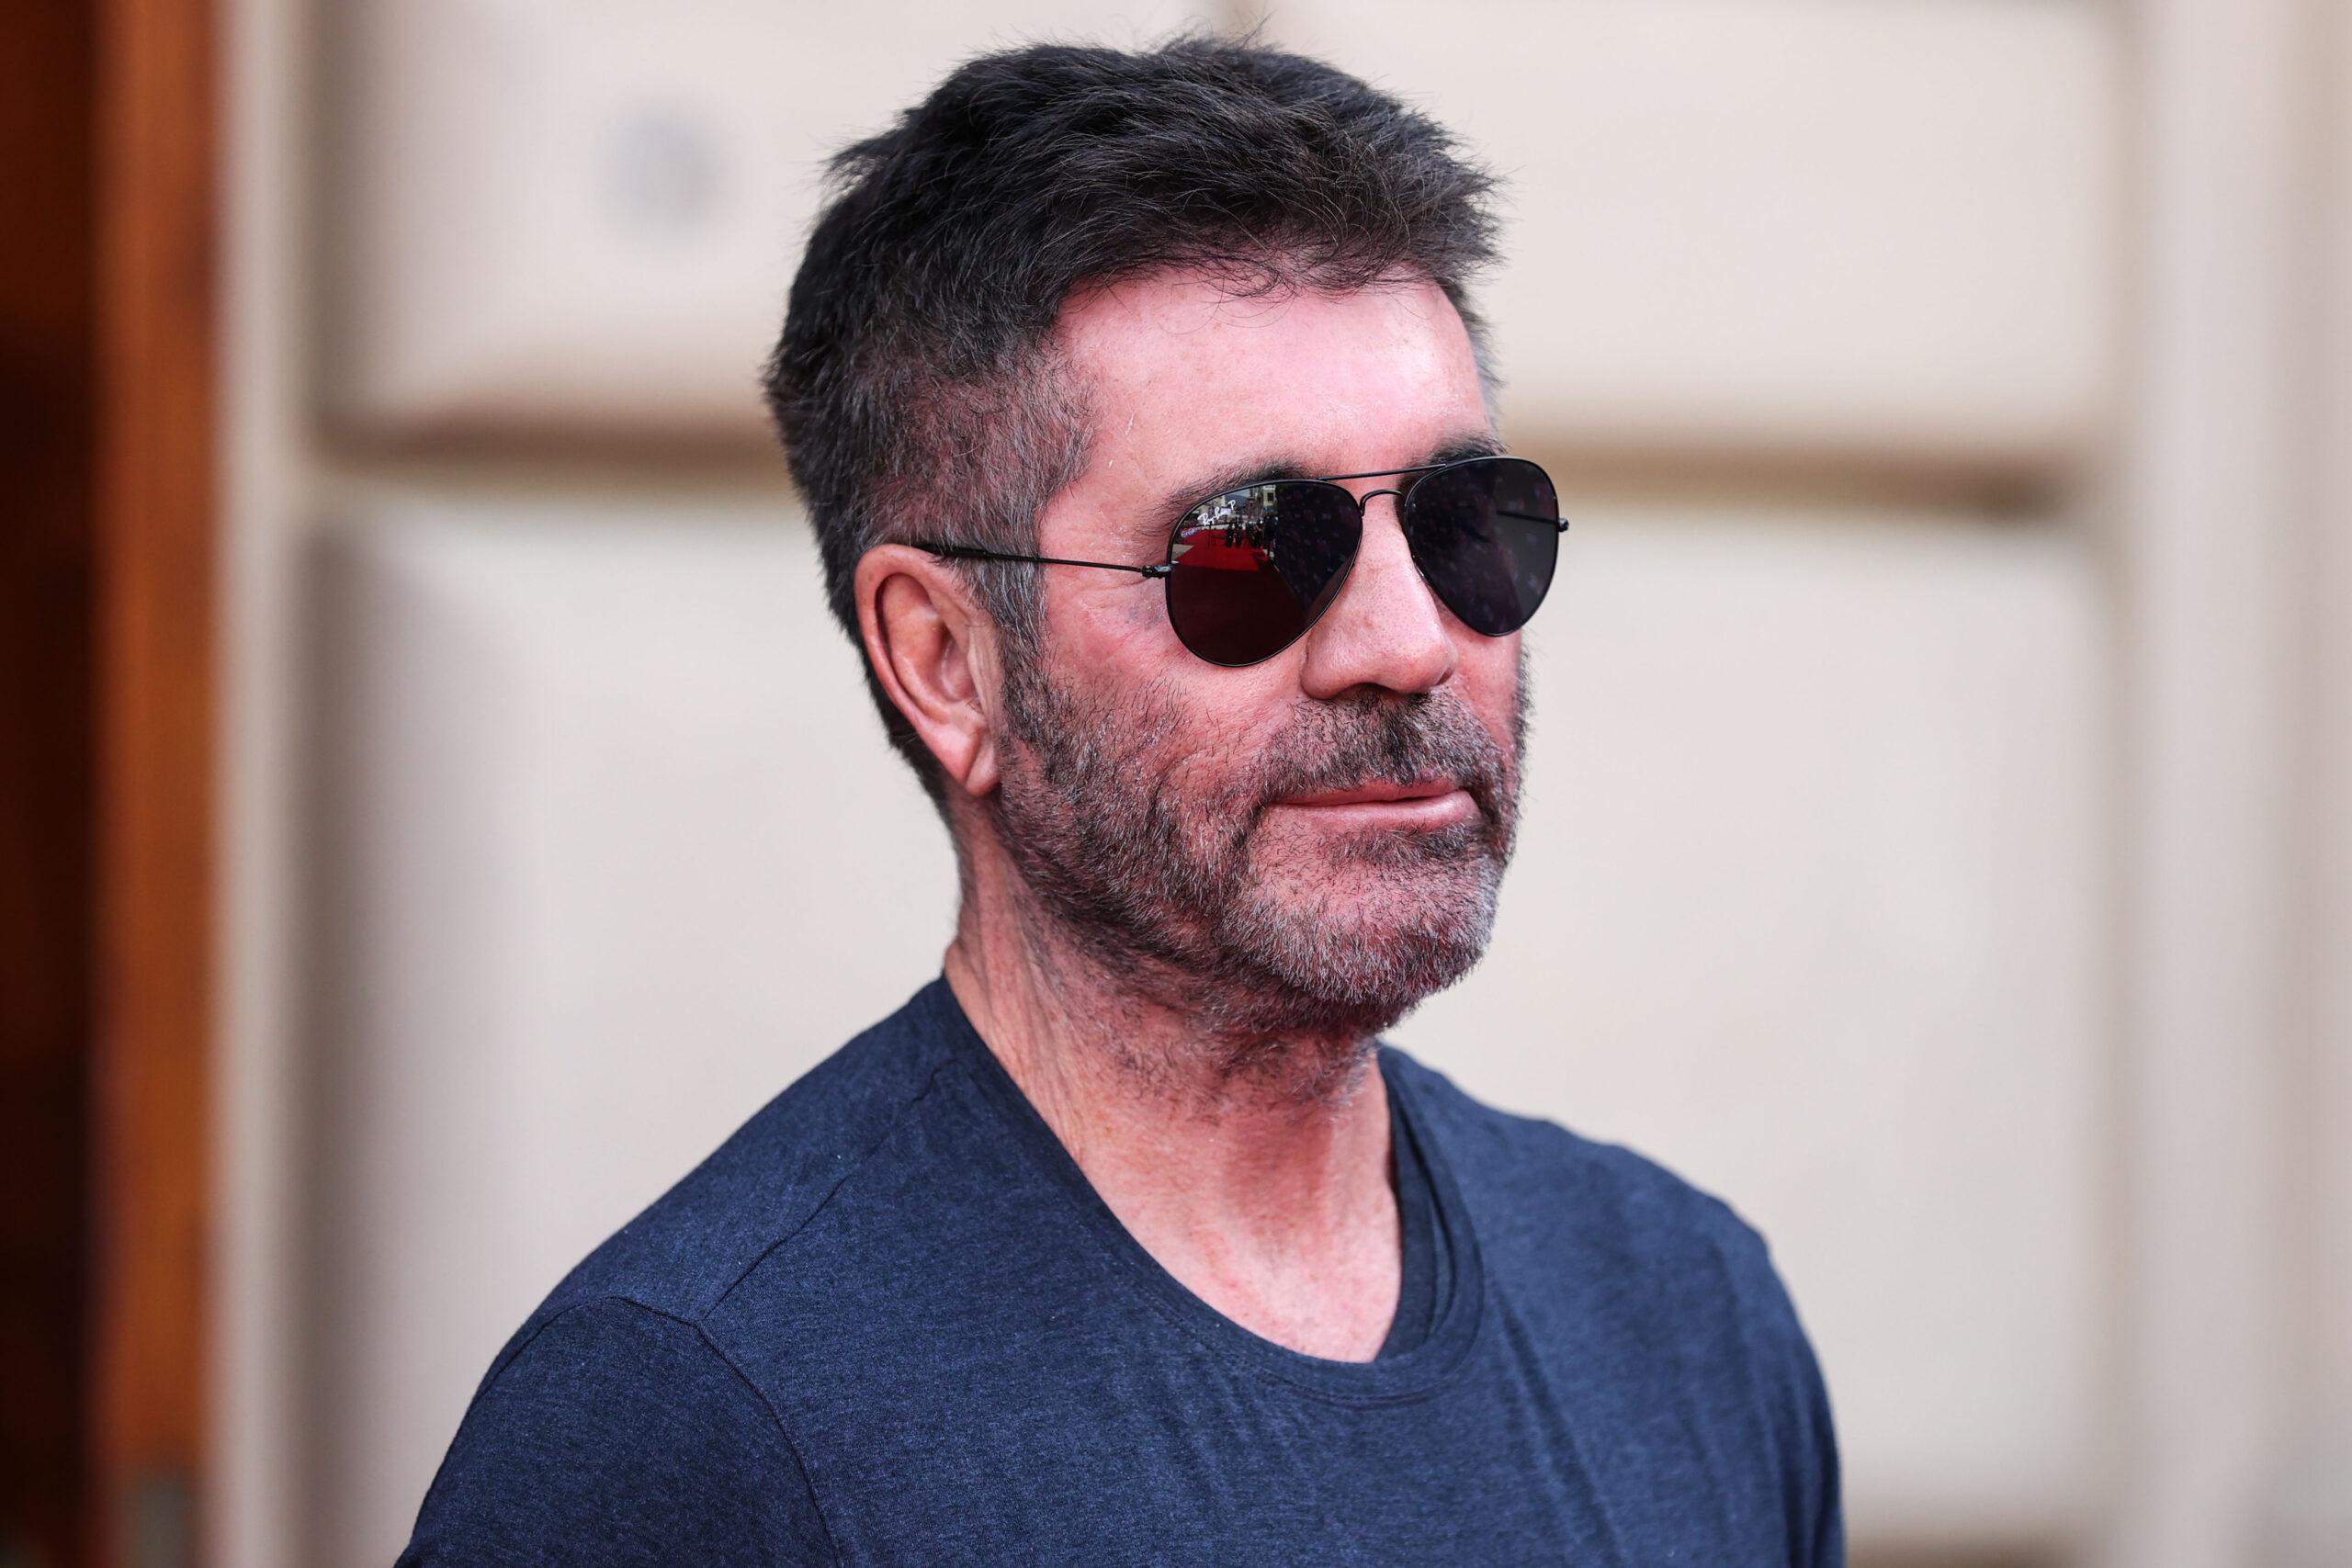 English TV personality Simon Cowell arrives at NBC's 'America's Got Talent' Season 17 Kick-Off Red Carpet held at the Pasadena Civic Auditorium on April 20, 2022 in Pasadena, Los Angeles, California, United States.